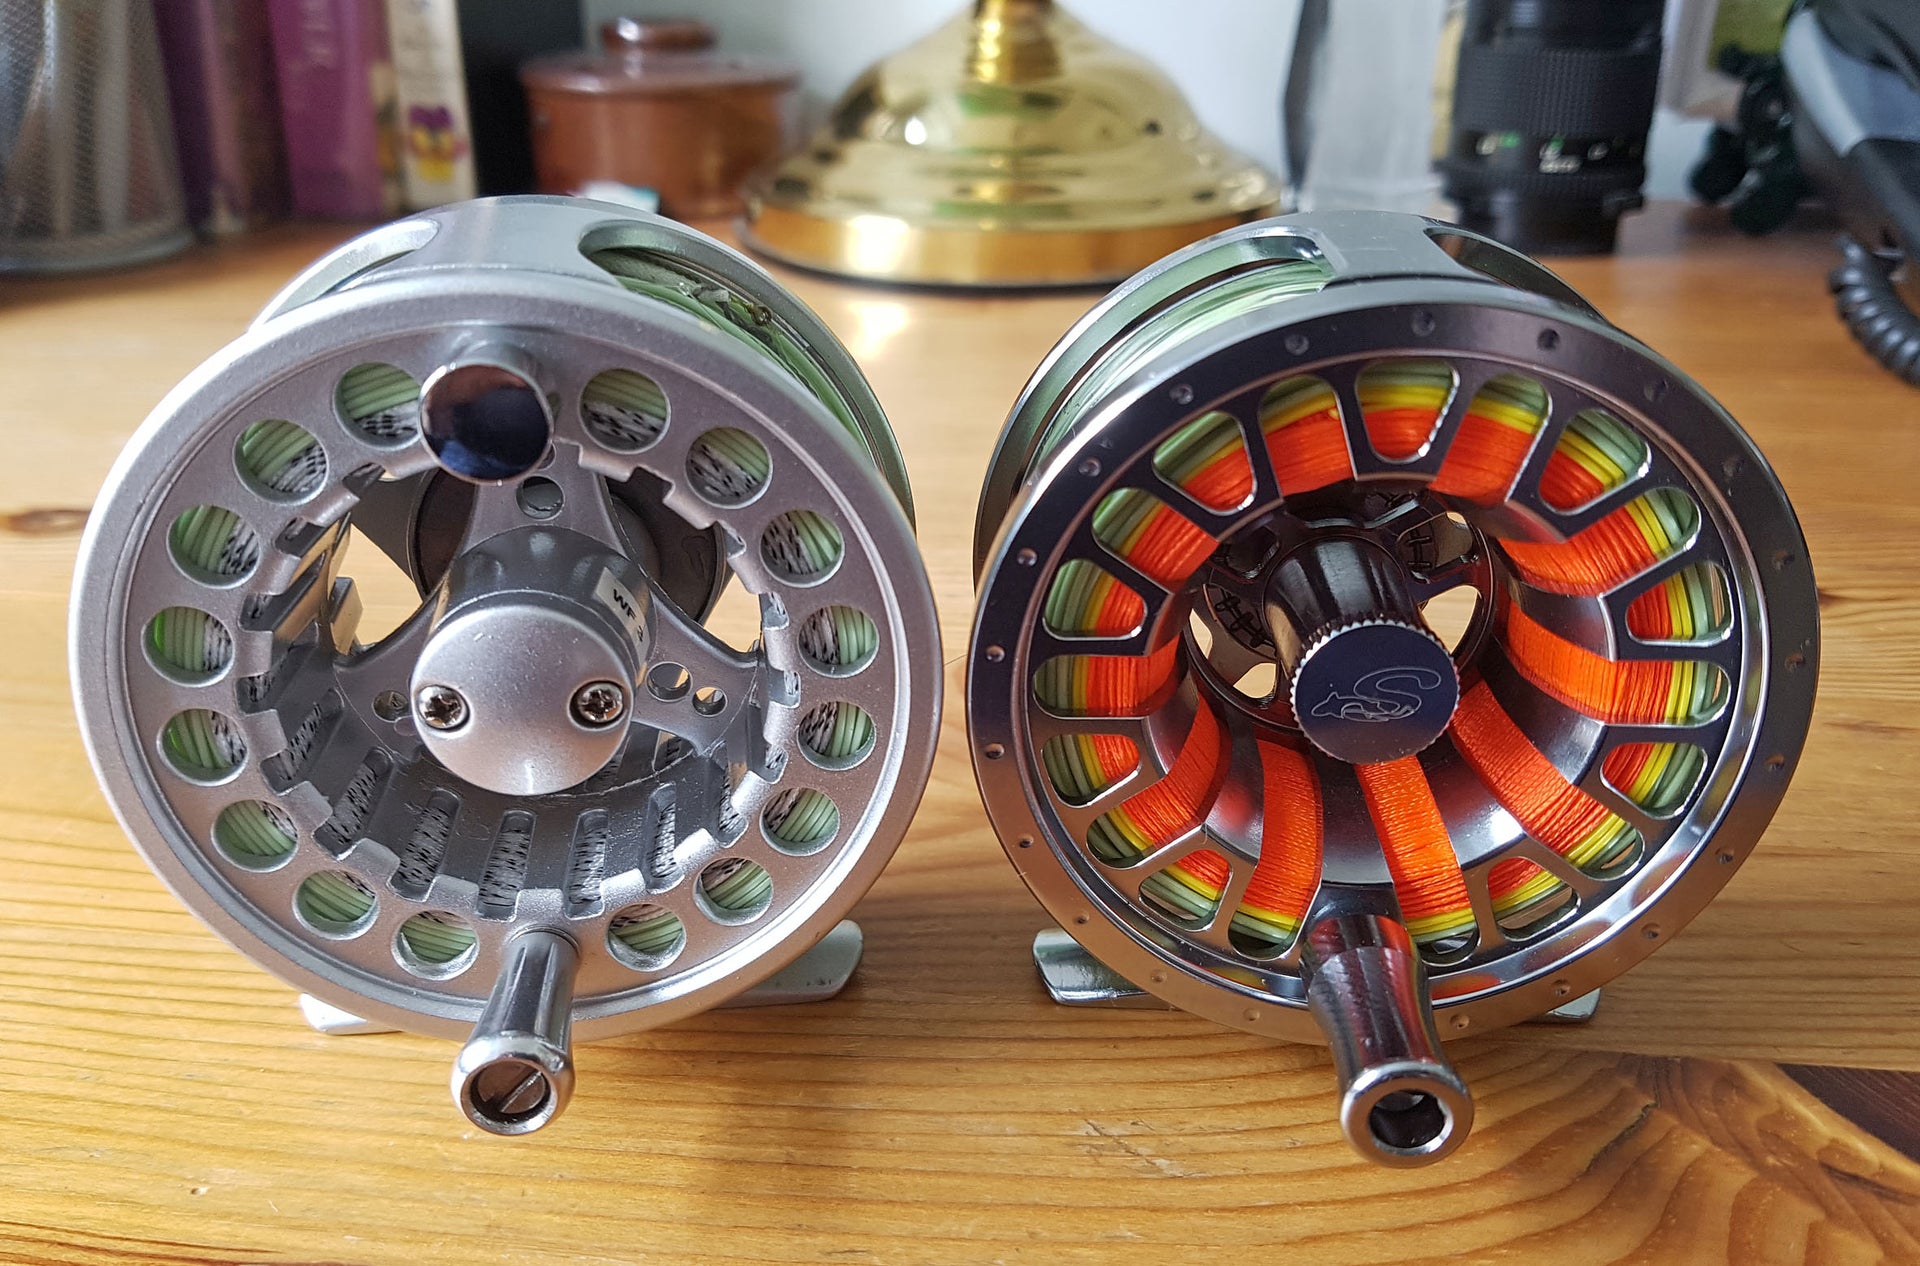 5/6 reel with 7wt line?